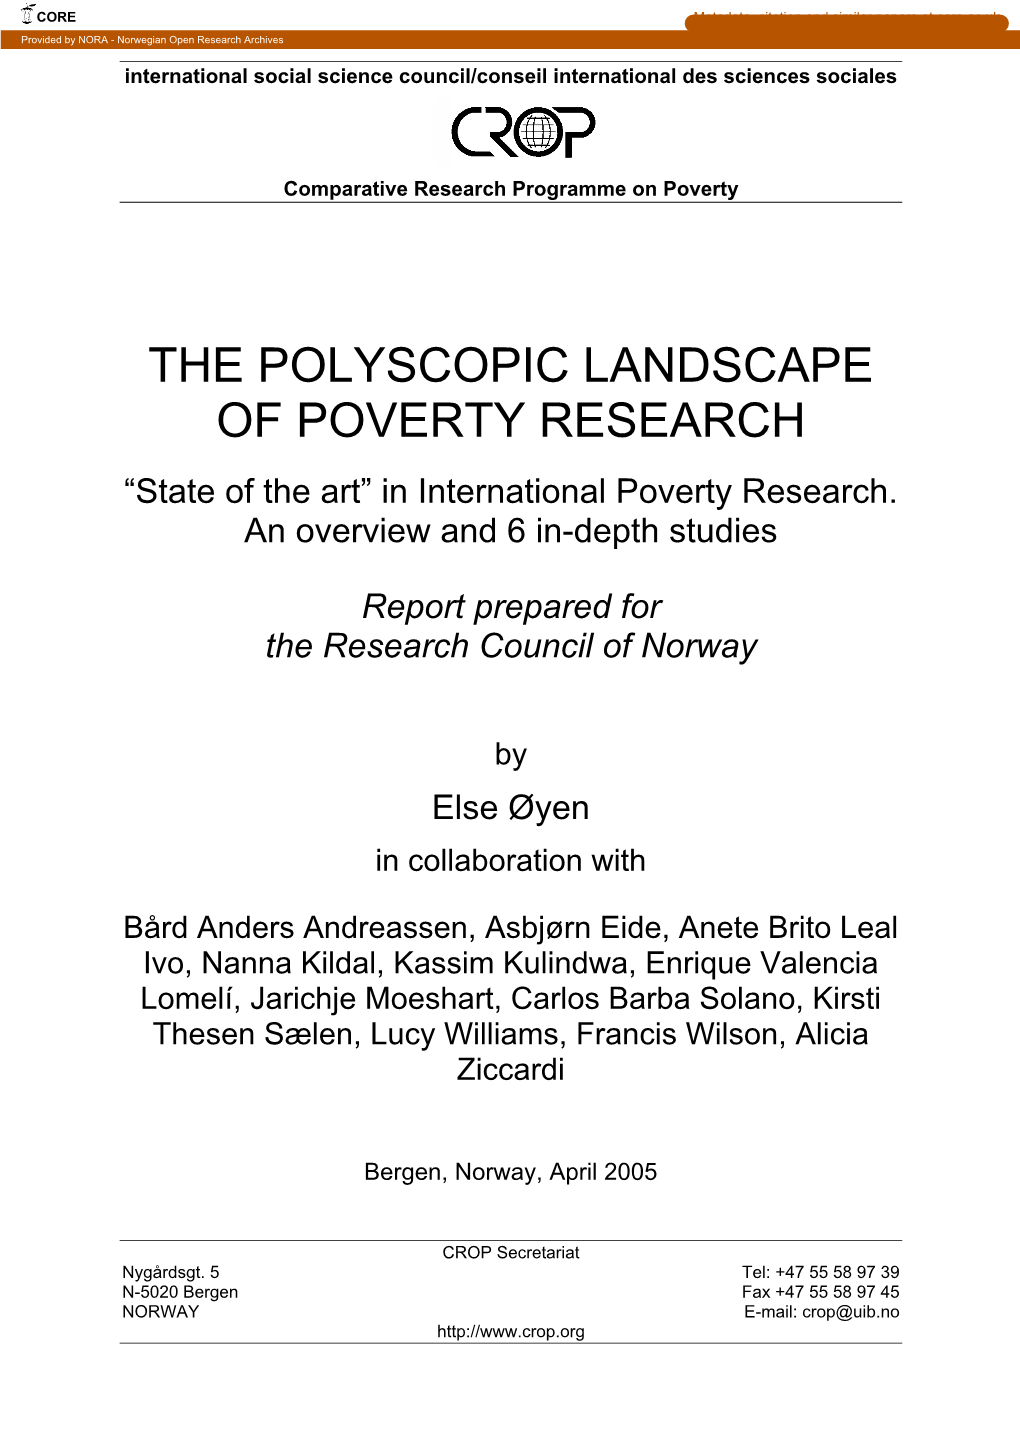 The Polyscopic Landscape of Poverty Research